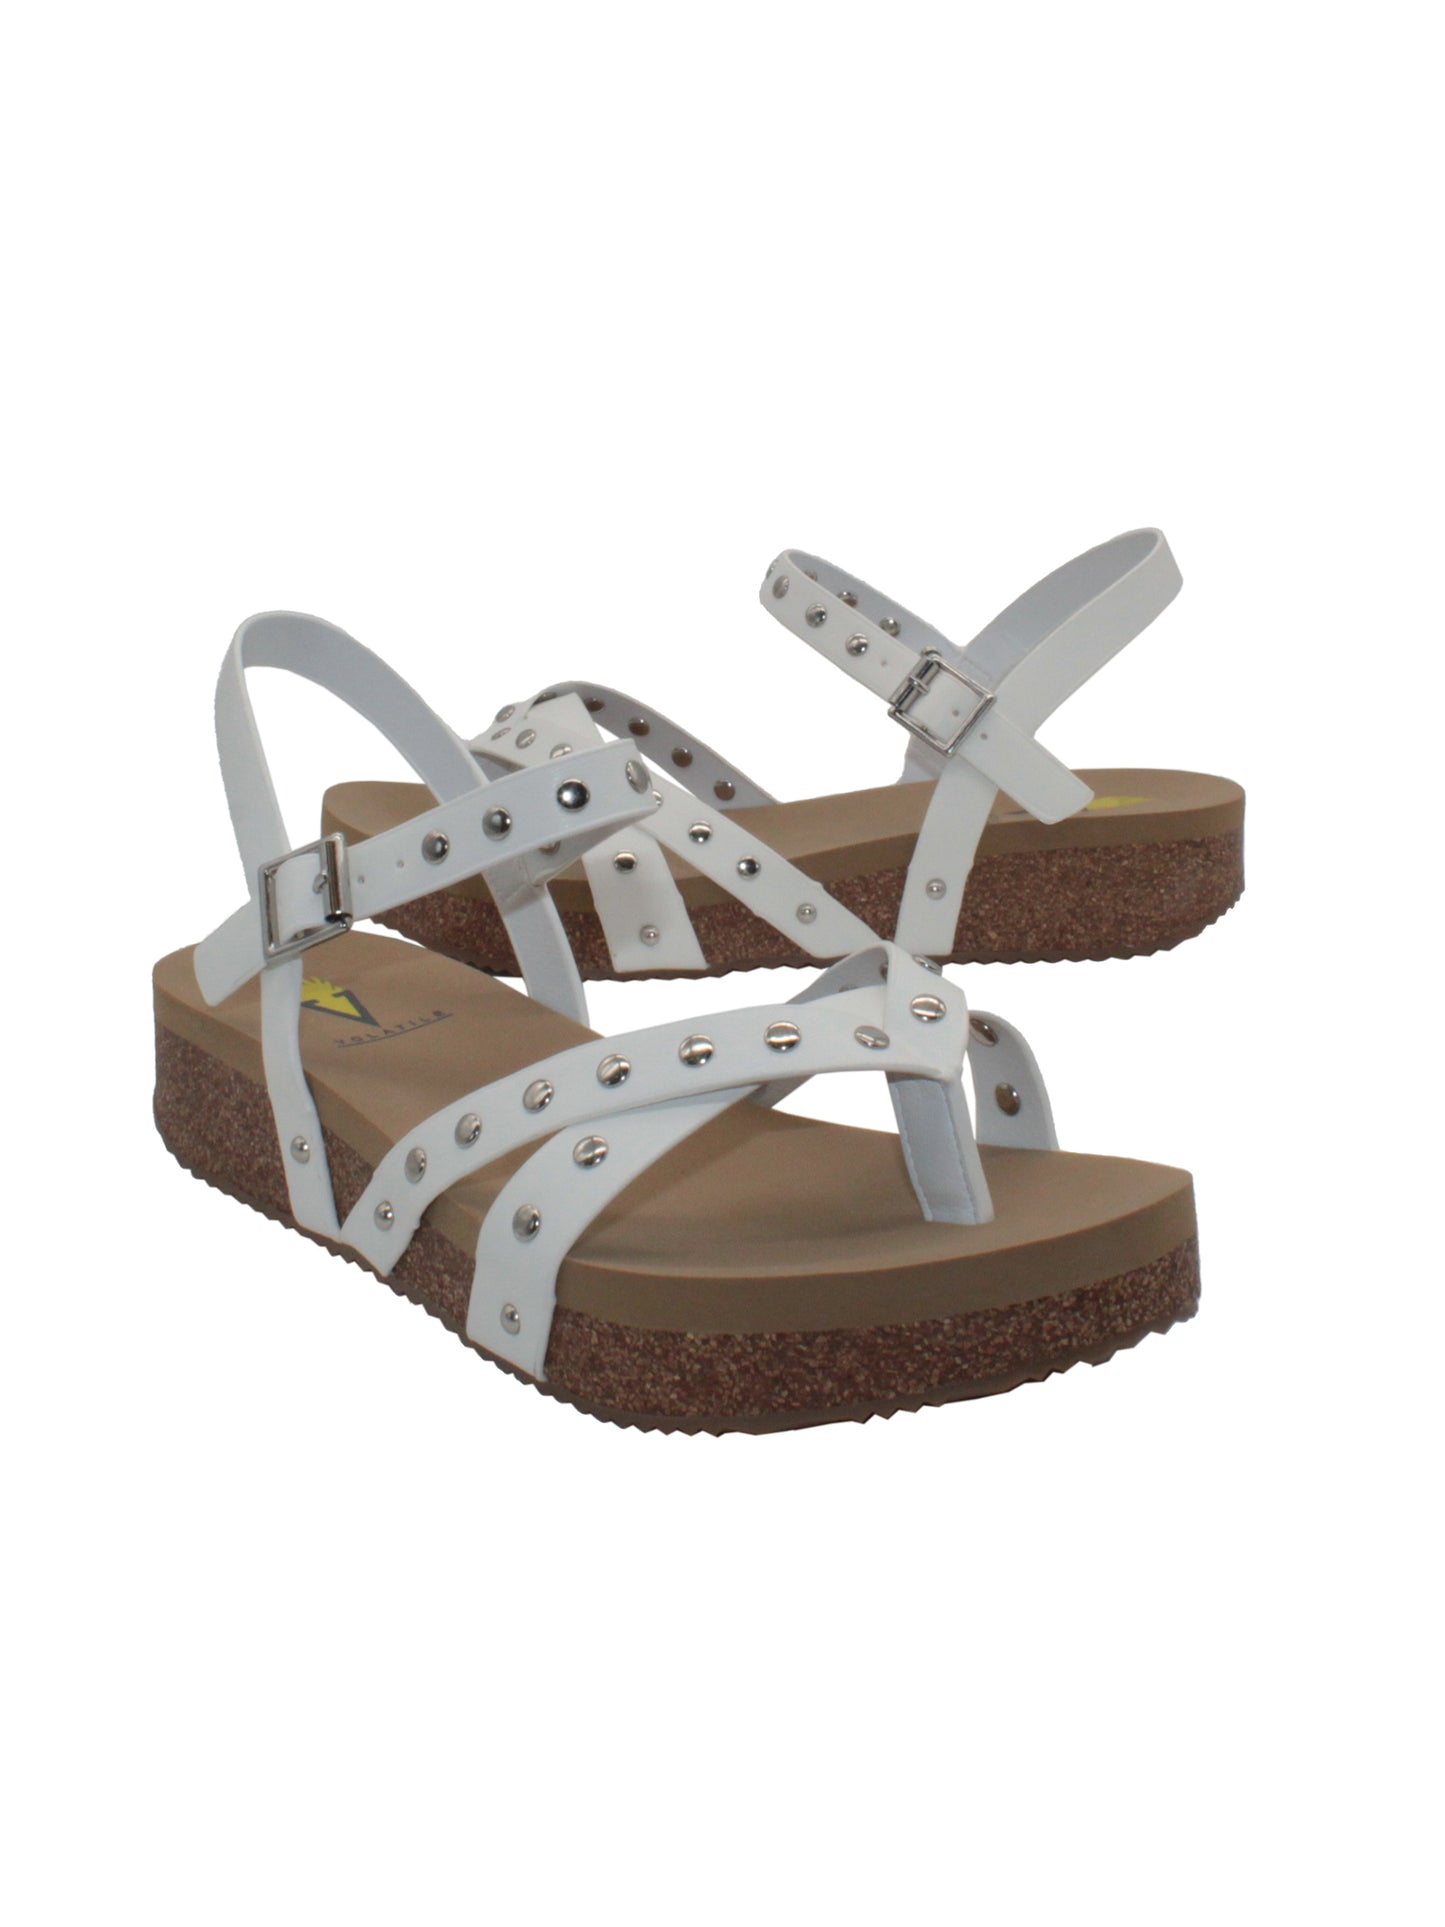  Volatile's Kelton sandal in a vegan leather is our warm weather staple. The low platform wedge adds a subtle lift while offering stability, perfect for dressing up weekend wear or keeping fashionably comfortable at the next outdoor party. Style them with everything, from shorts to dresses, and more. white  2